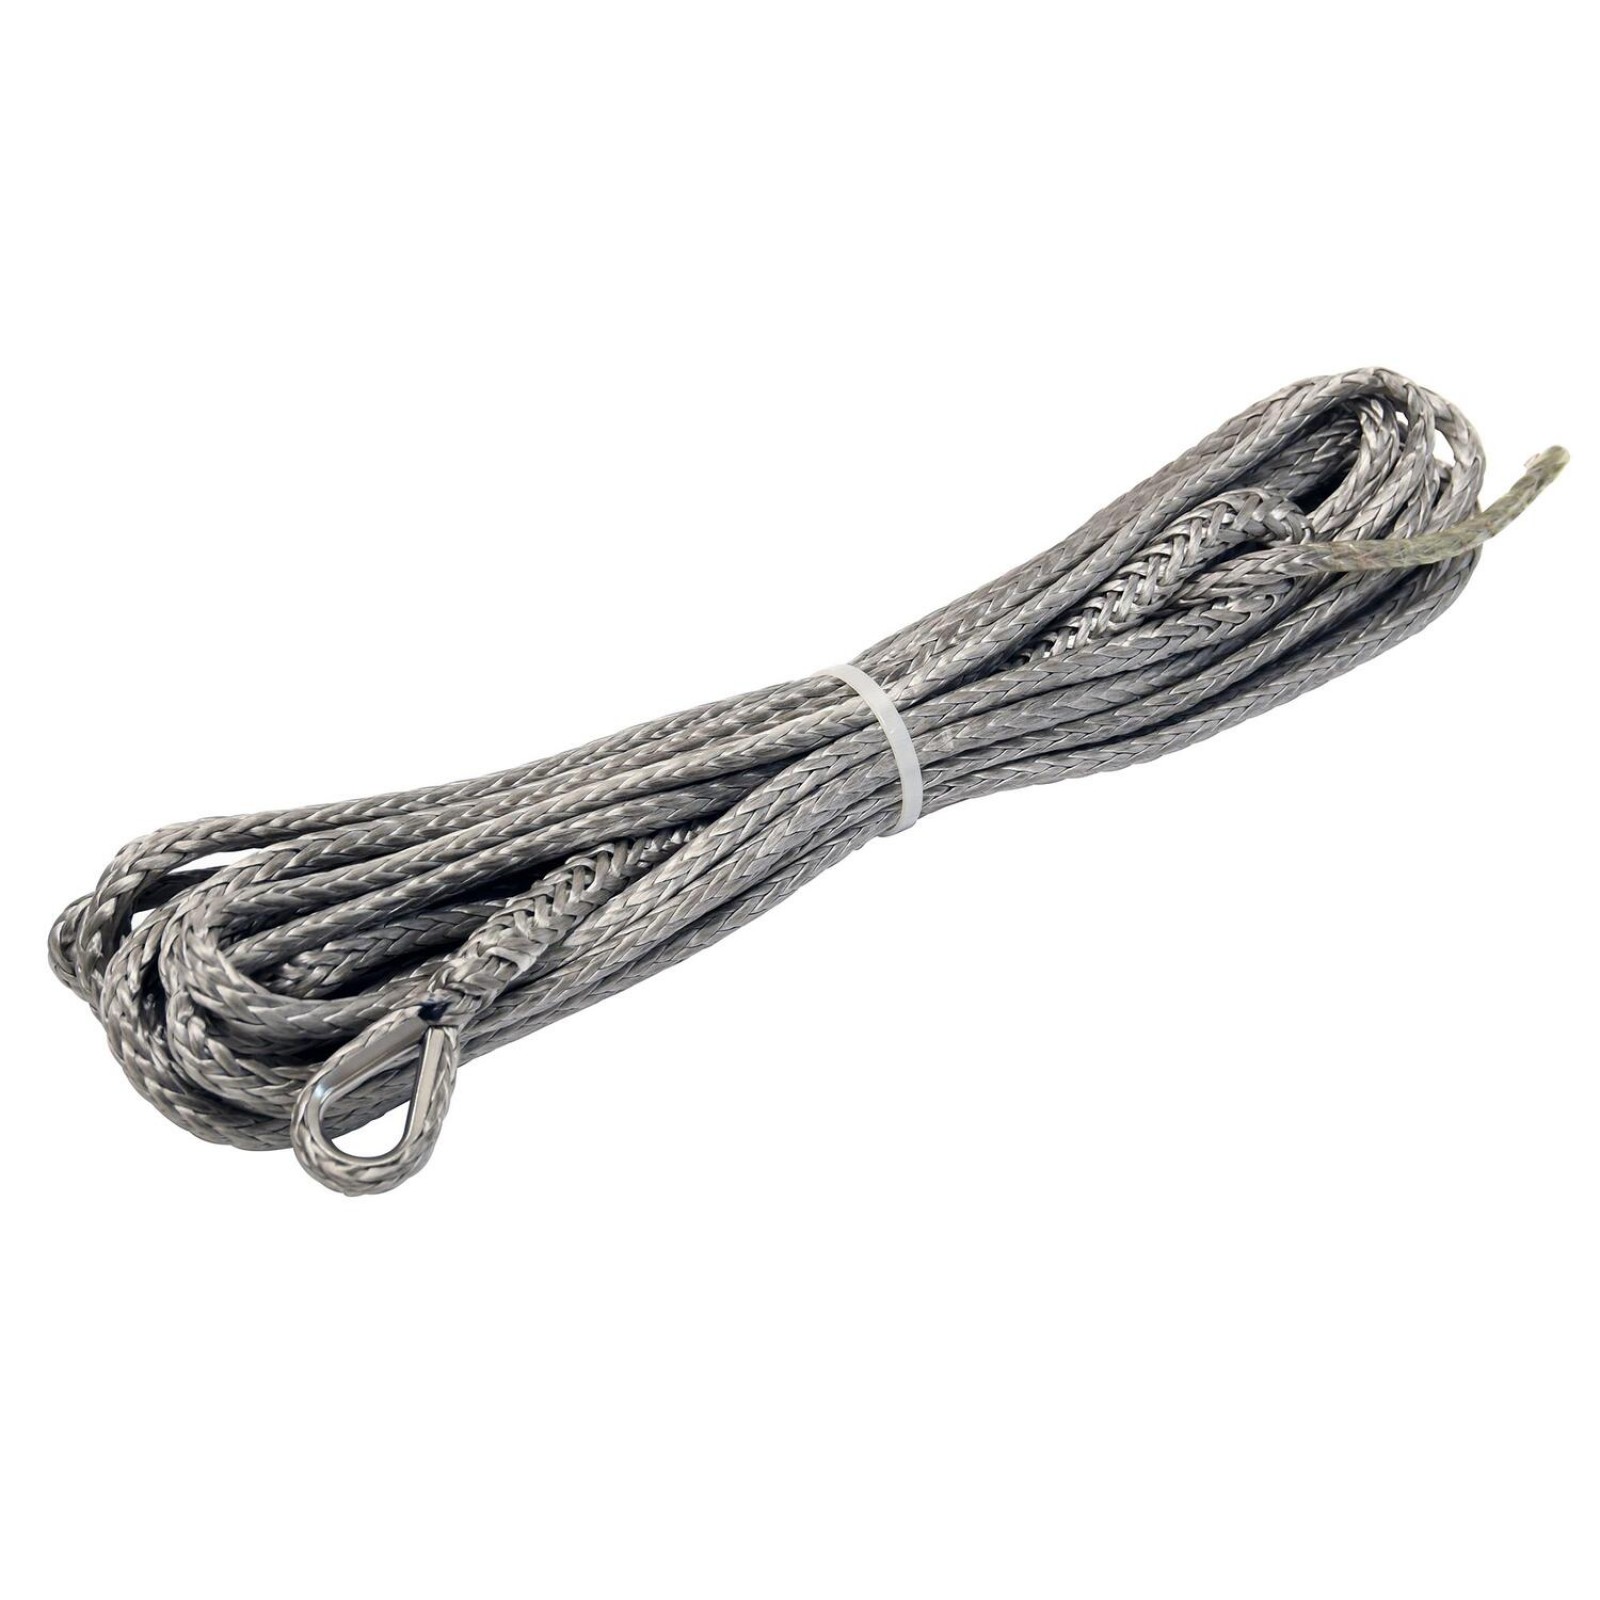 Premium Quality Synthetic Winch Rope 30m x 12mm, Screw Fix